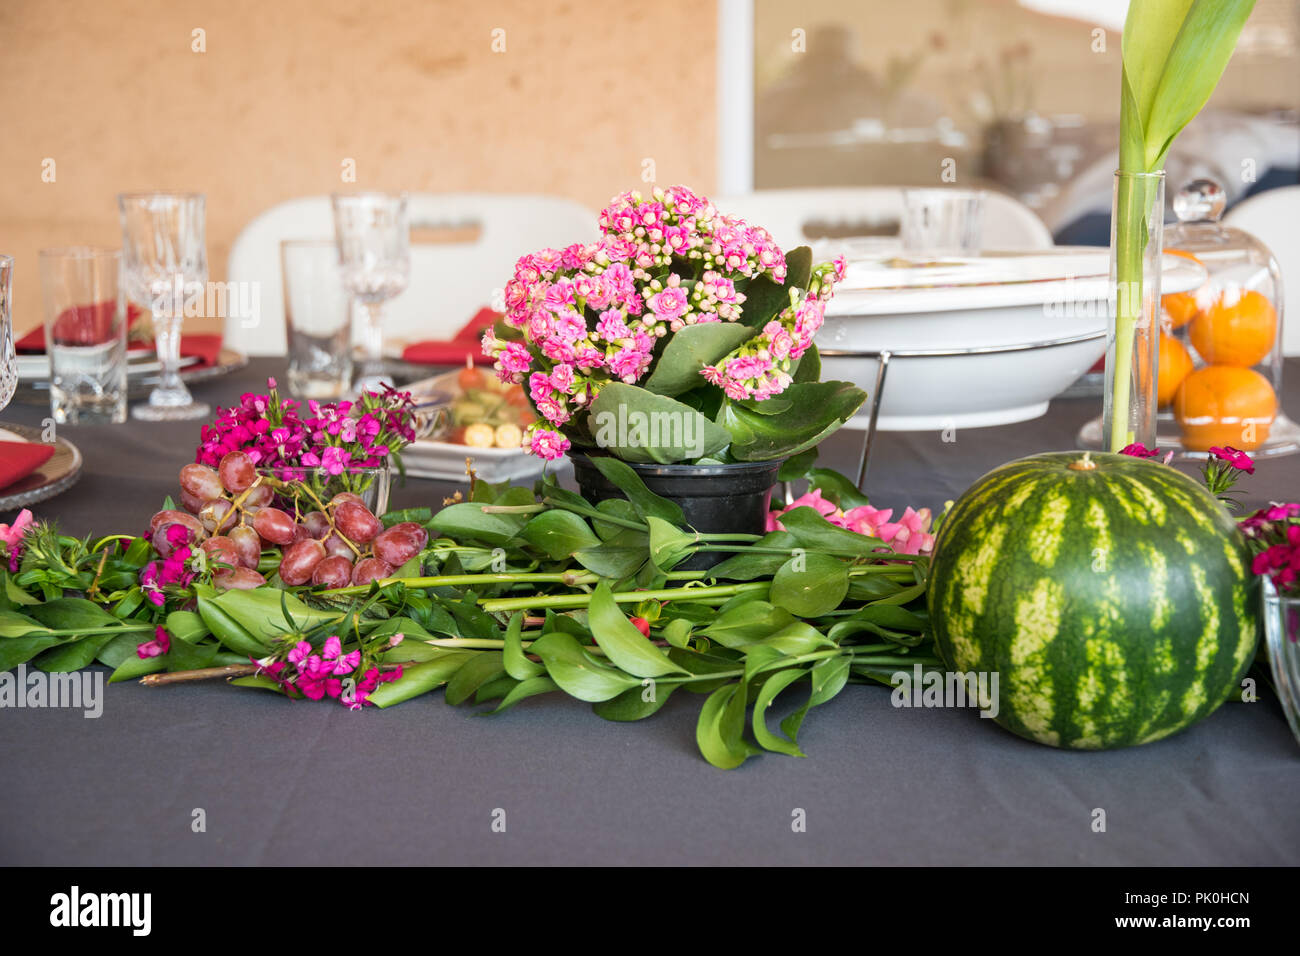 A lunch table with floral display of lovely orange flowers with colourful pink and reddish arrangements in foreground with a round watermelon & grapes Stock Photo